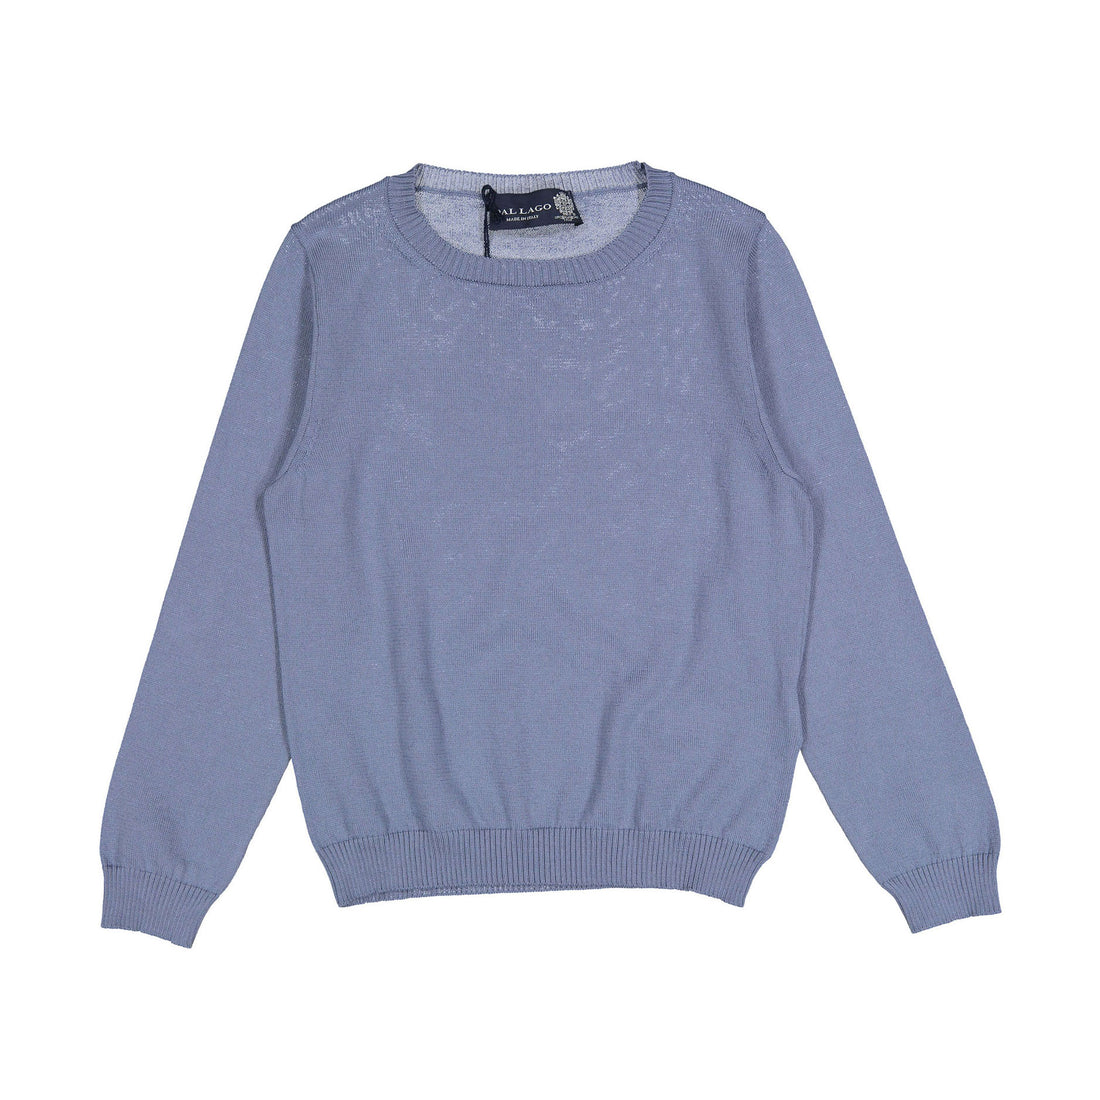 Dal Lago Charcoal Blue Percy Sweater